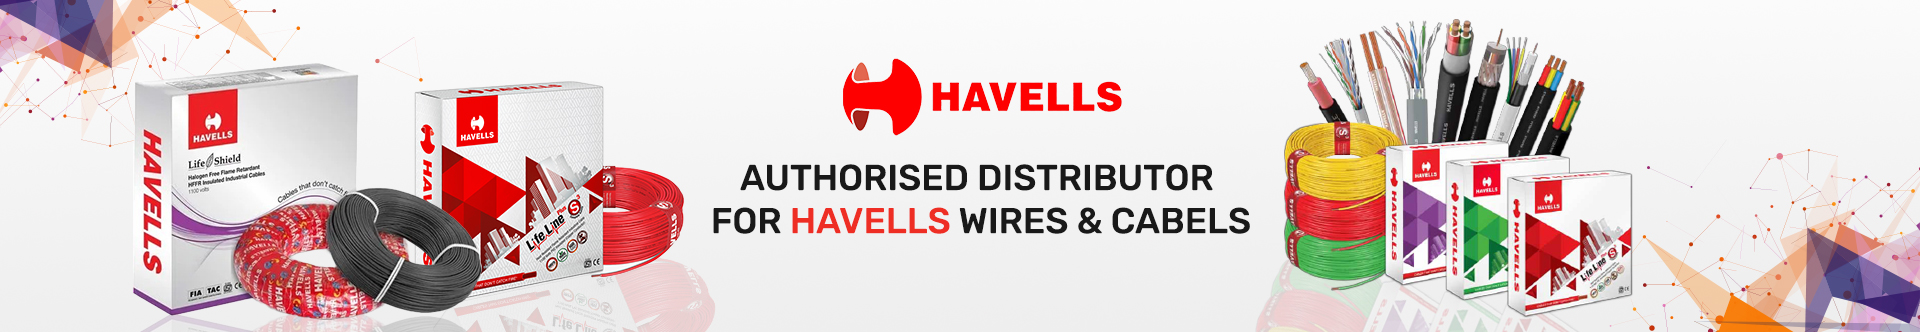 Best Havells Wire Dealers in Bangalore